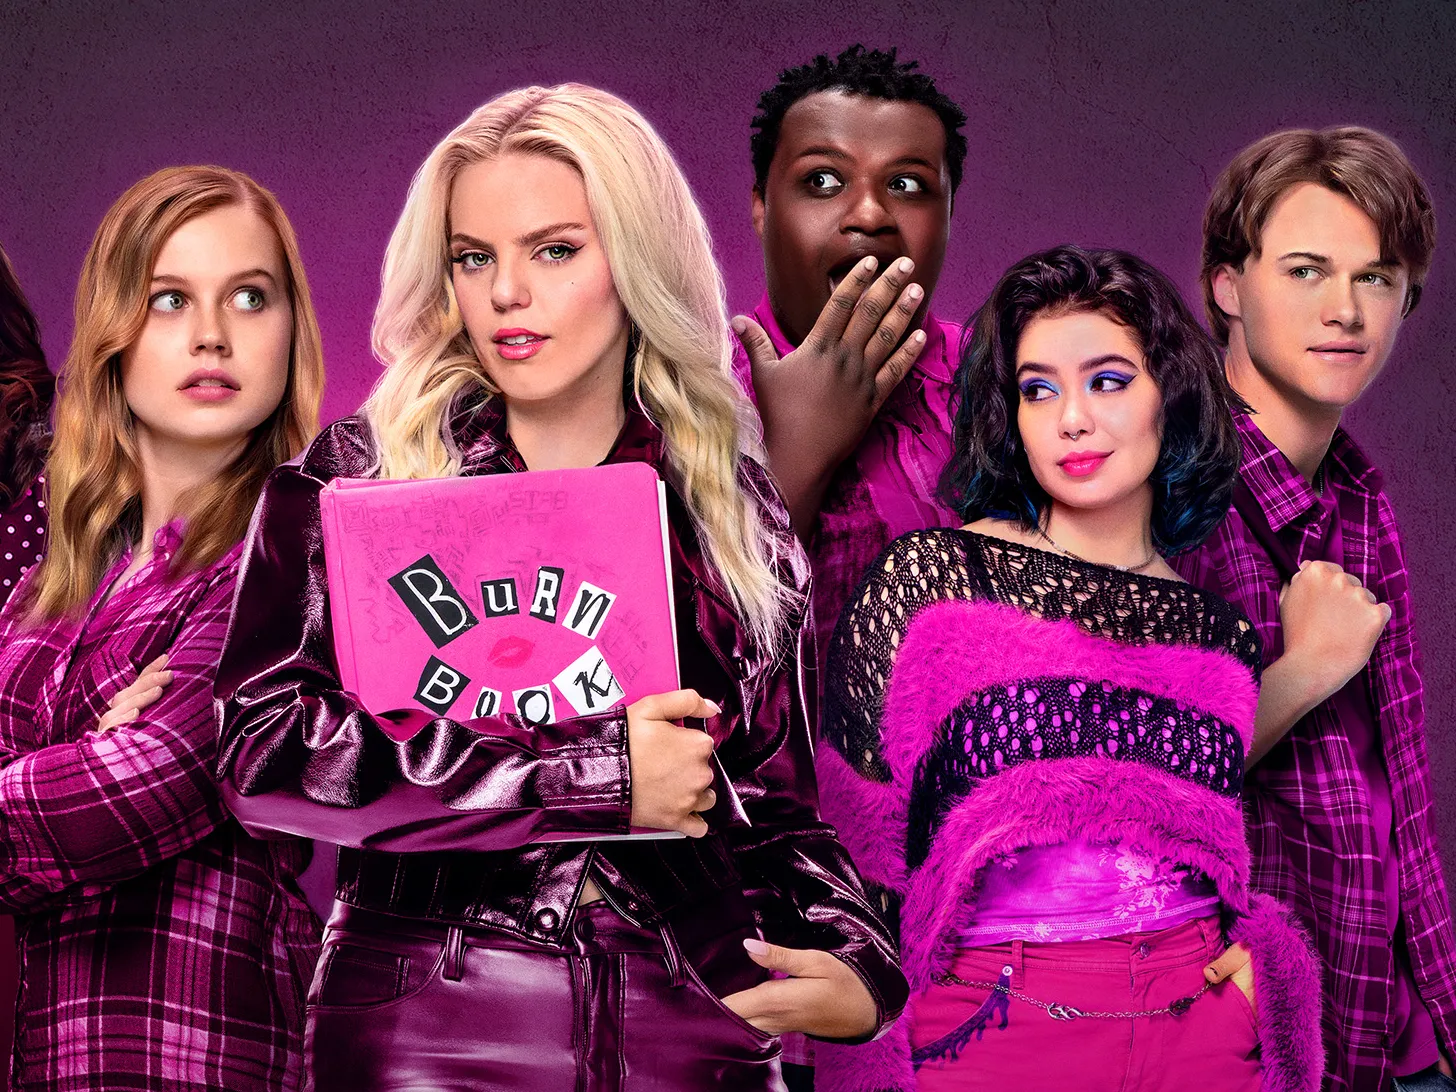 Mean Girls kicks the weekend off with $3M+ in previews, while The Beekeeper buzzes with $2M+